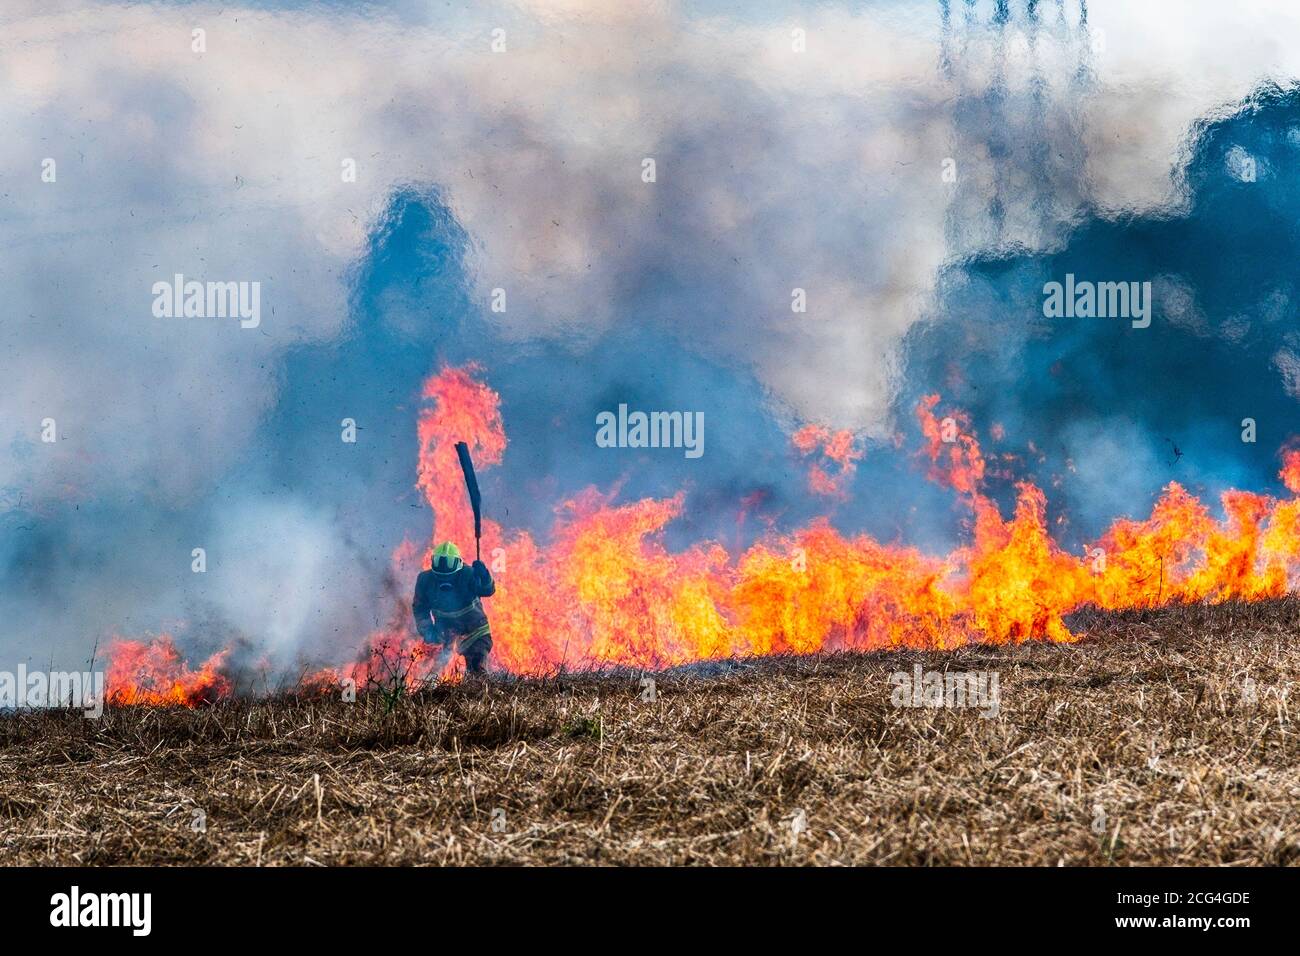 Firemen in breathing gear battle a crop fire believed to have been started deliberately. Stock Photo